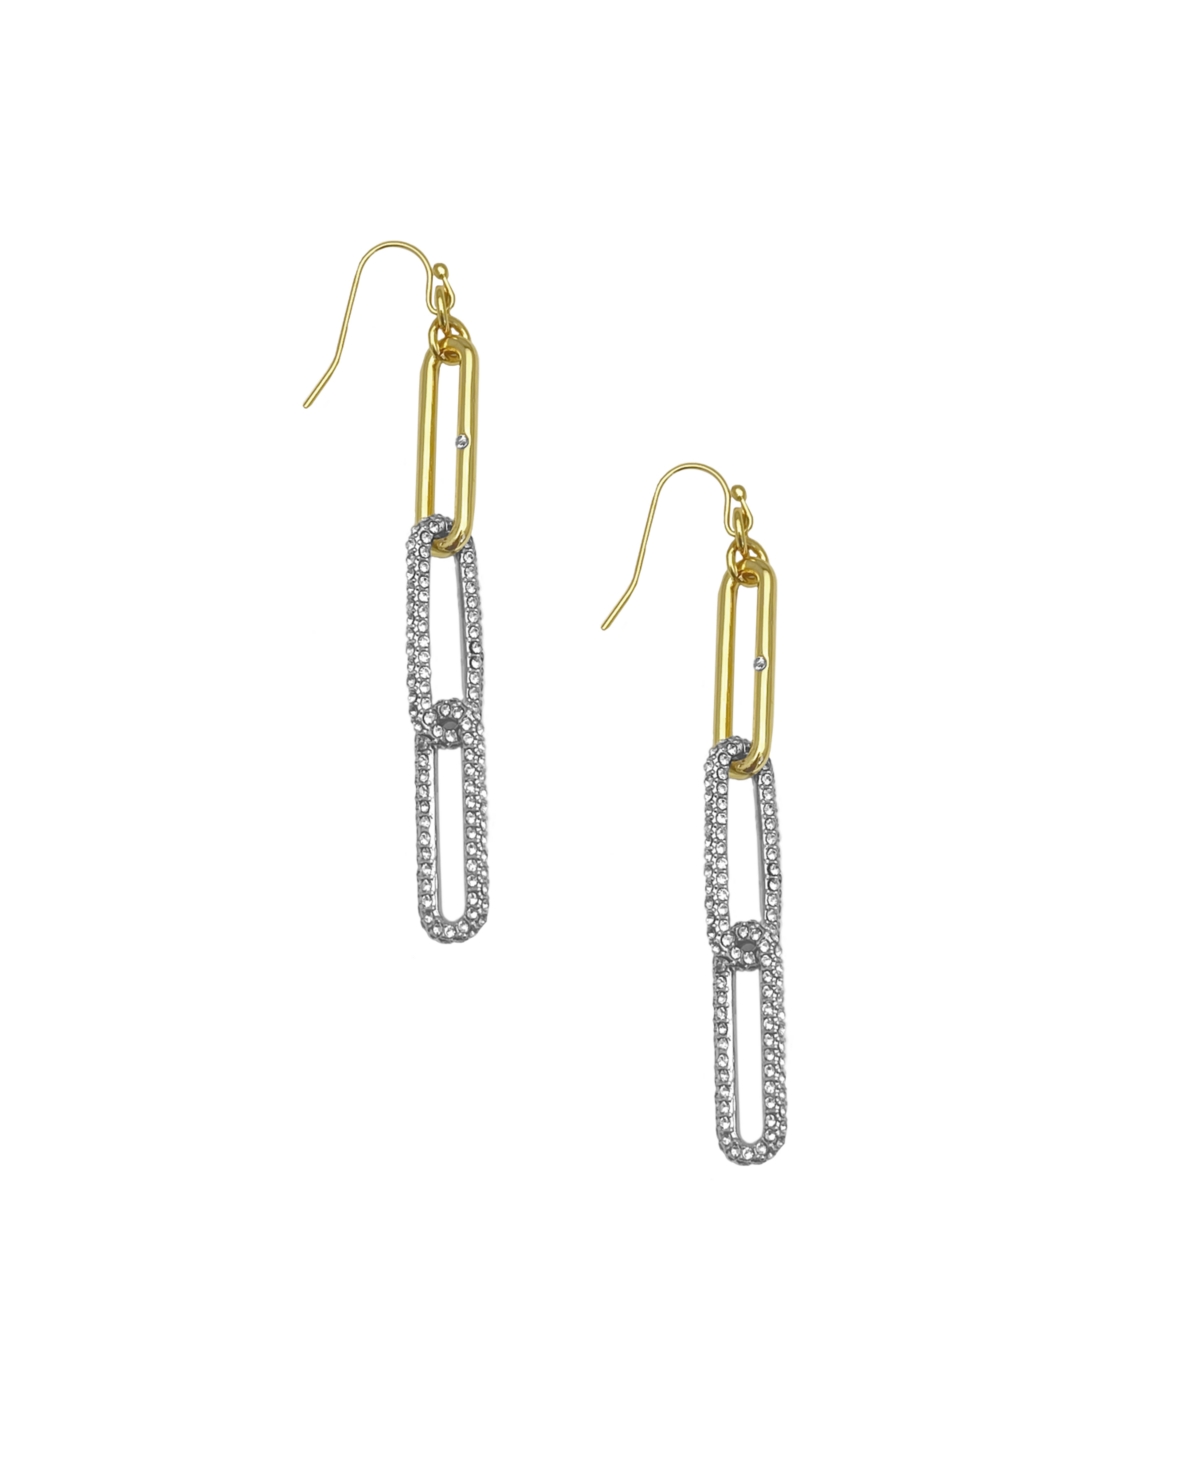 Vince Camuto Pave Linear Fish Hook Earrings In Gold-tone